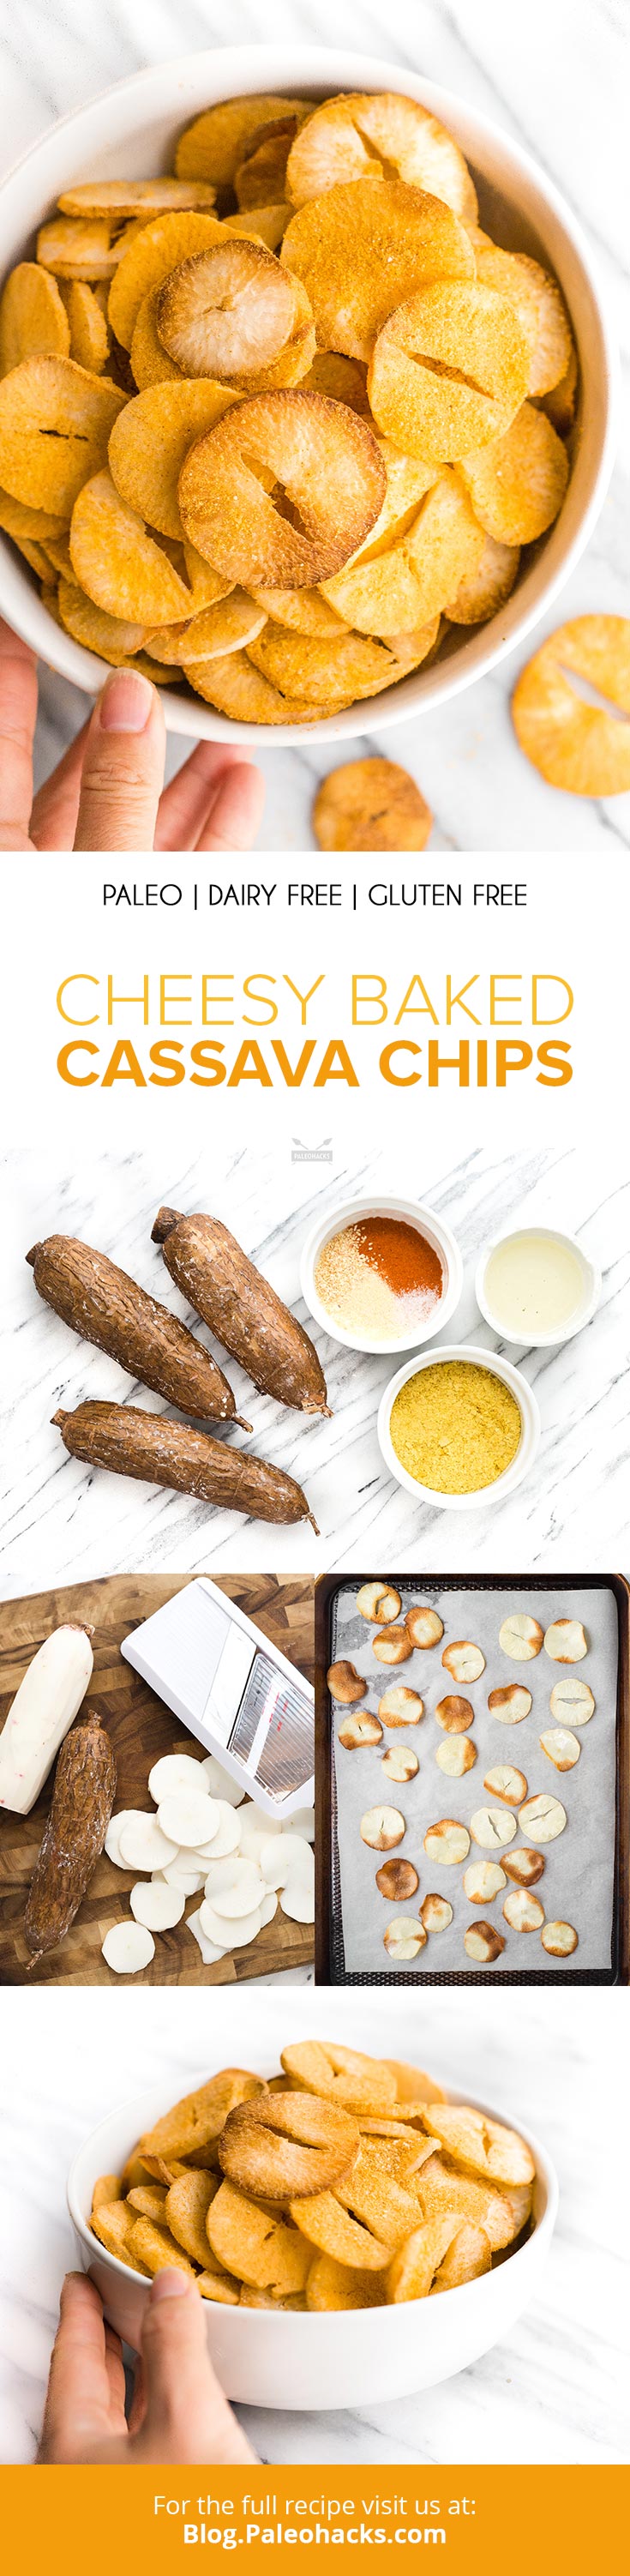 Better than Cheetos, these yuca chips recreate that irresistible “cheesy” flavor you love with a Paleo twist. Flavorful, cheesy, and extremely crispy!